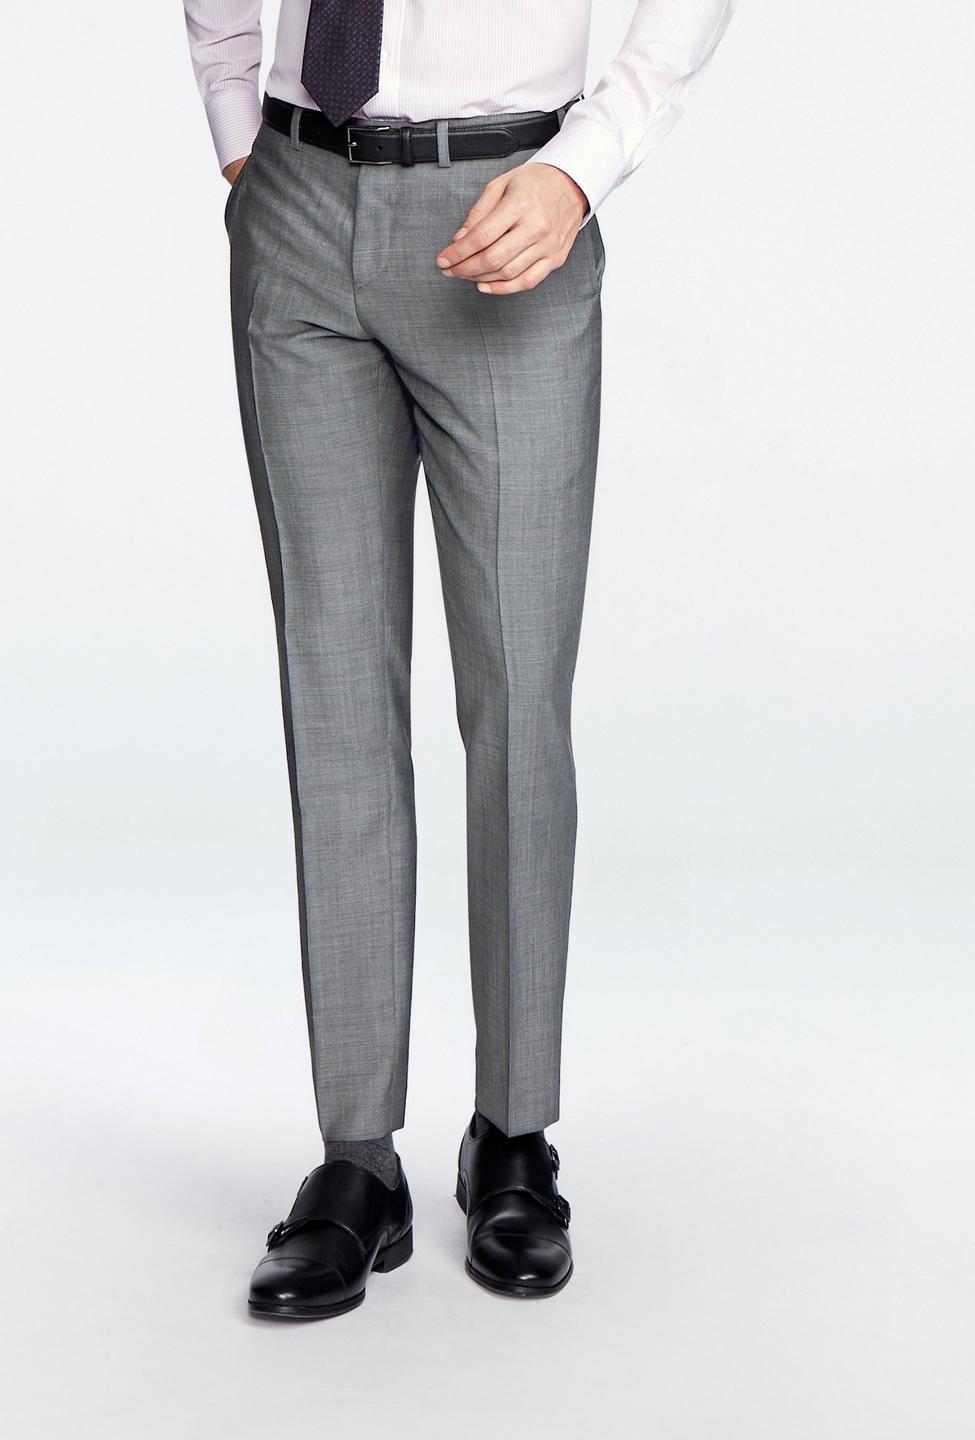 Gray pants - Hamilton Solid Design from Luxury Indochino Collection